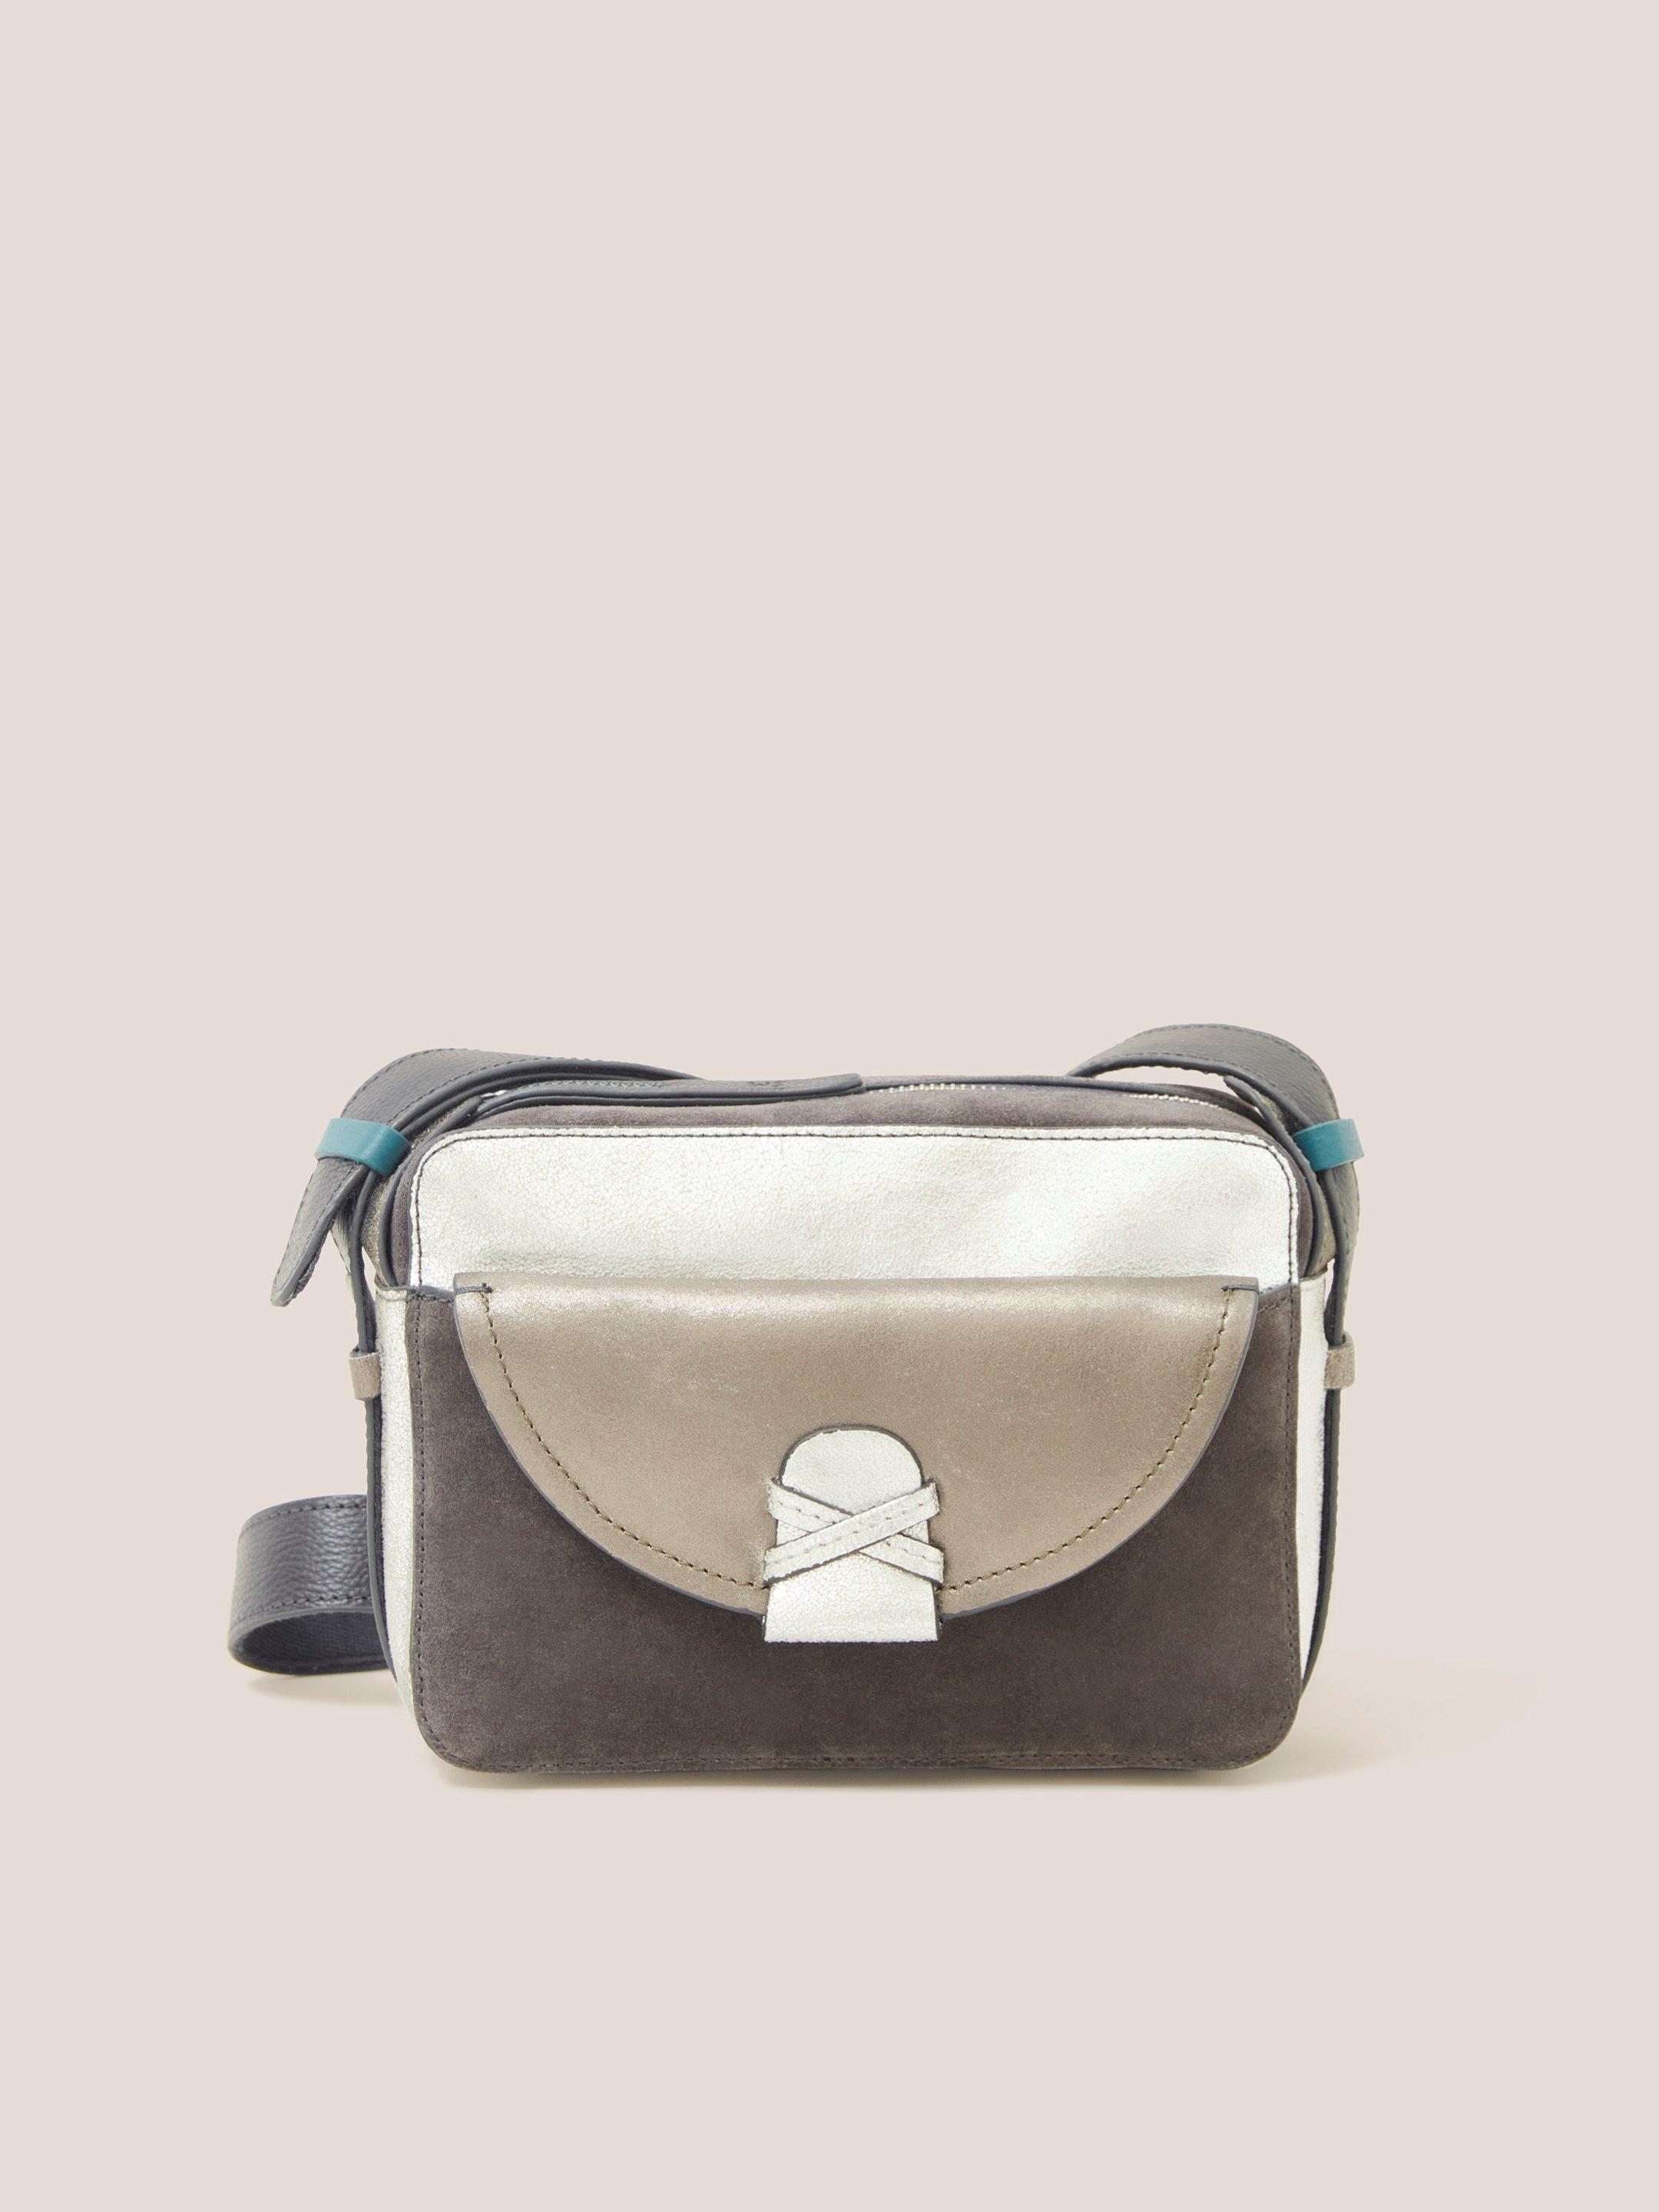 Lola Leather Camera Bag in GREY MLT - LIFESTYLE